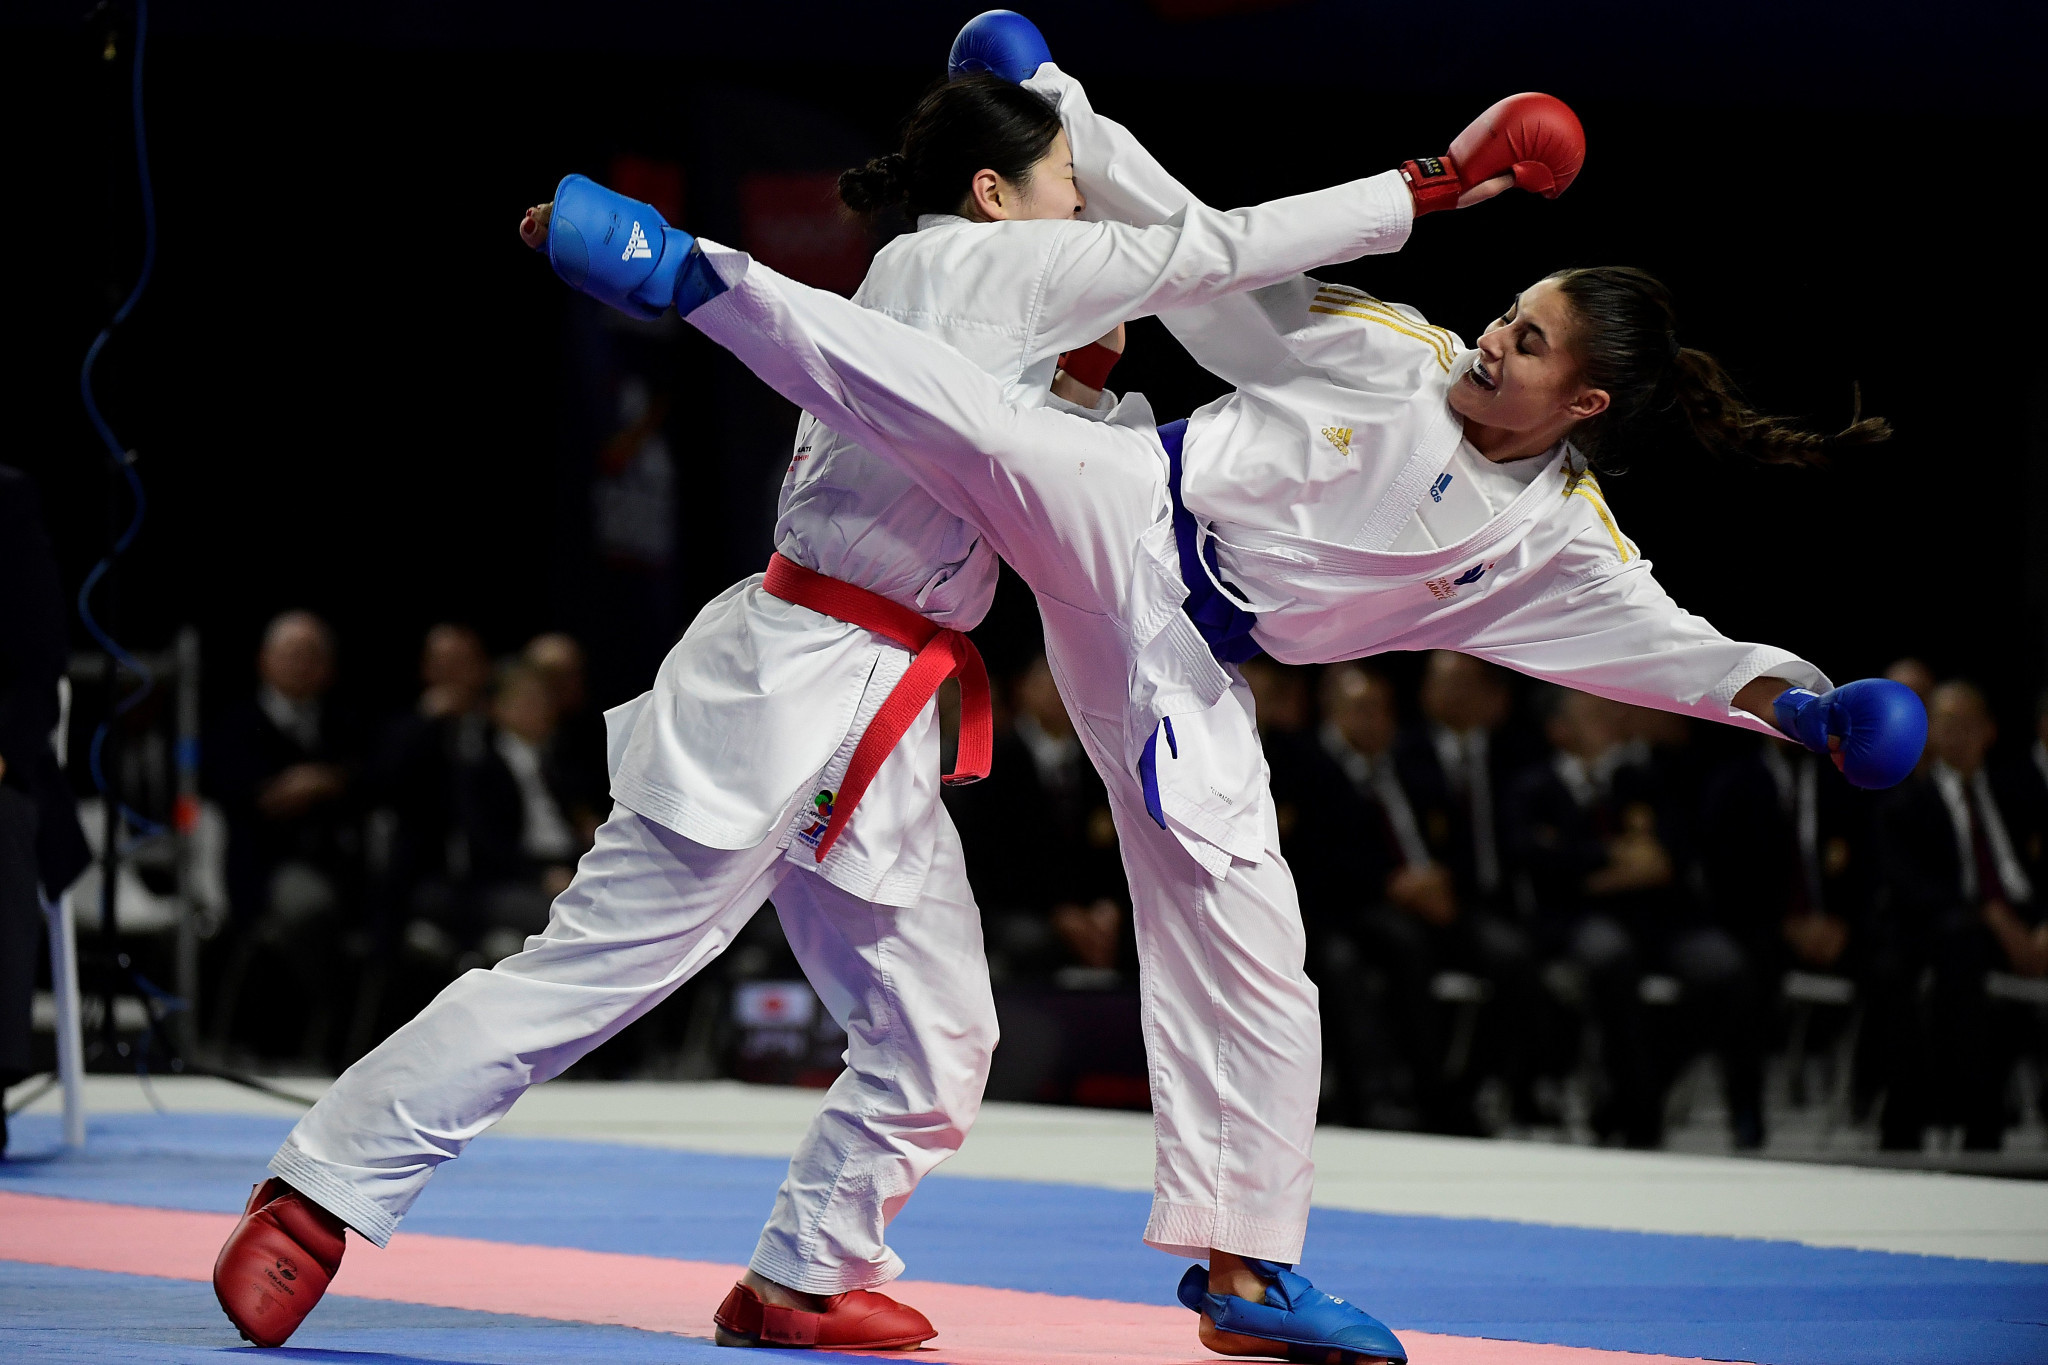 The World Karate Federation is set to undergo a "digital transformation", according to its President ©Getty Images